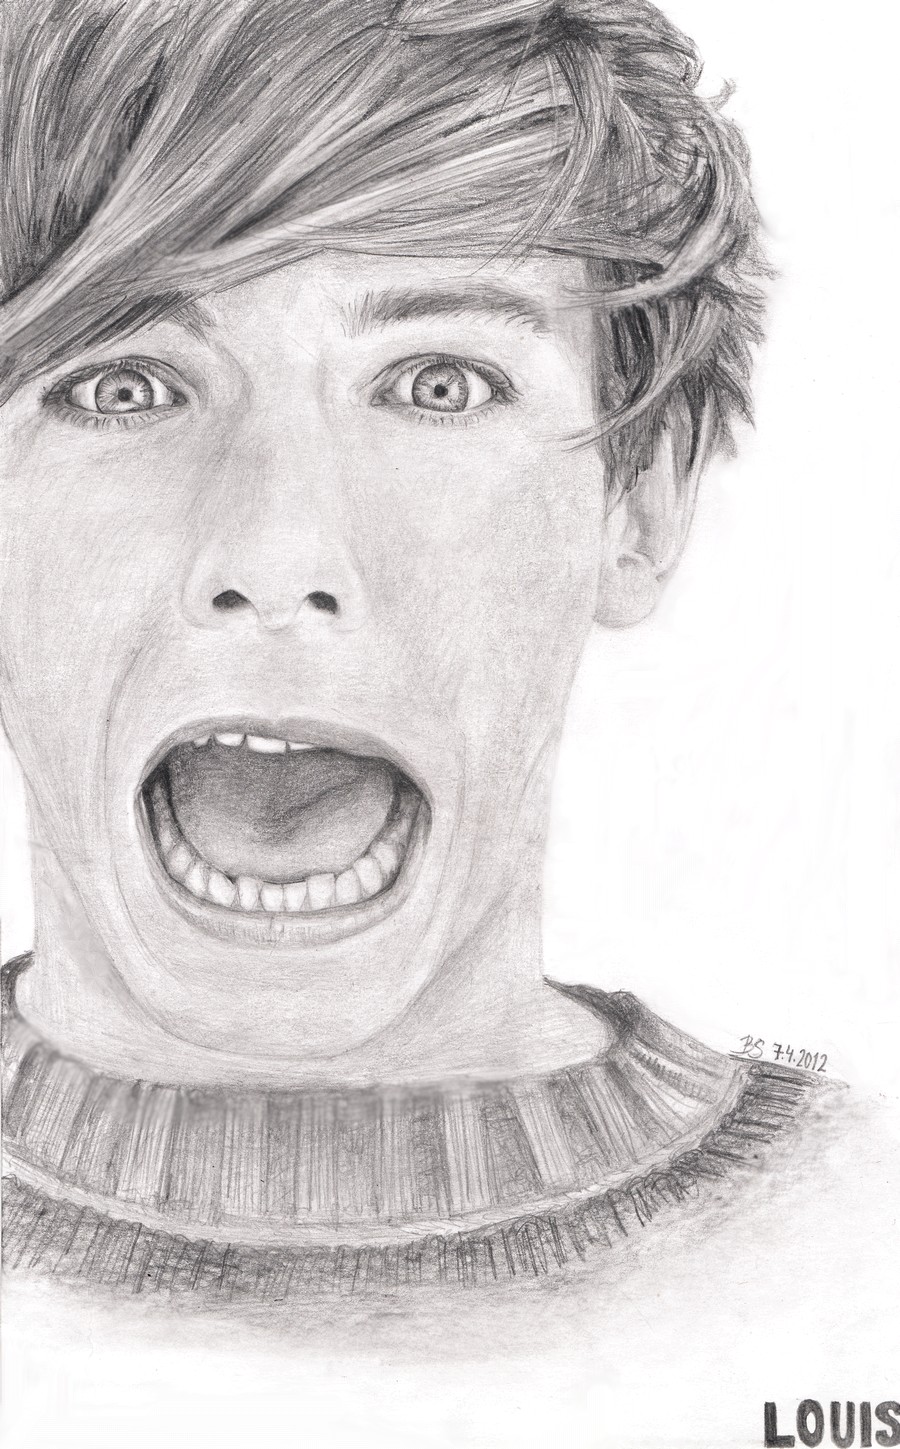 Louis Tomlinson - One Direction by Bree-Style on DeviantArt